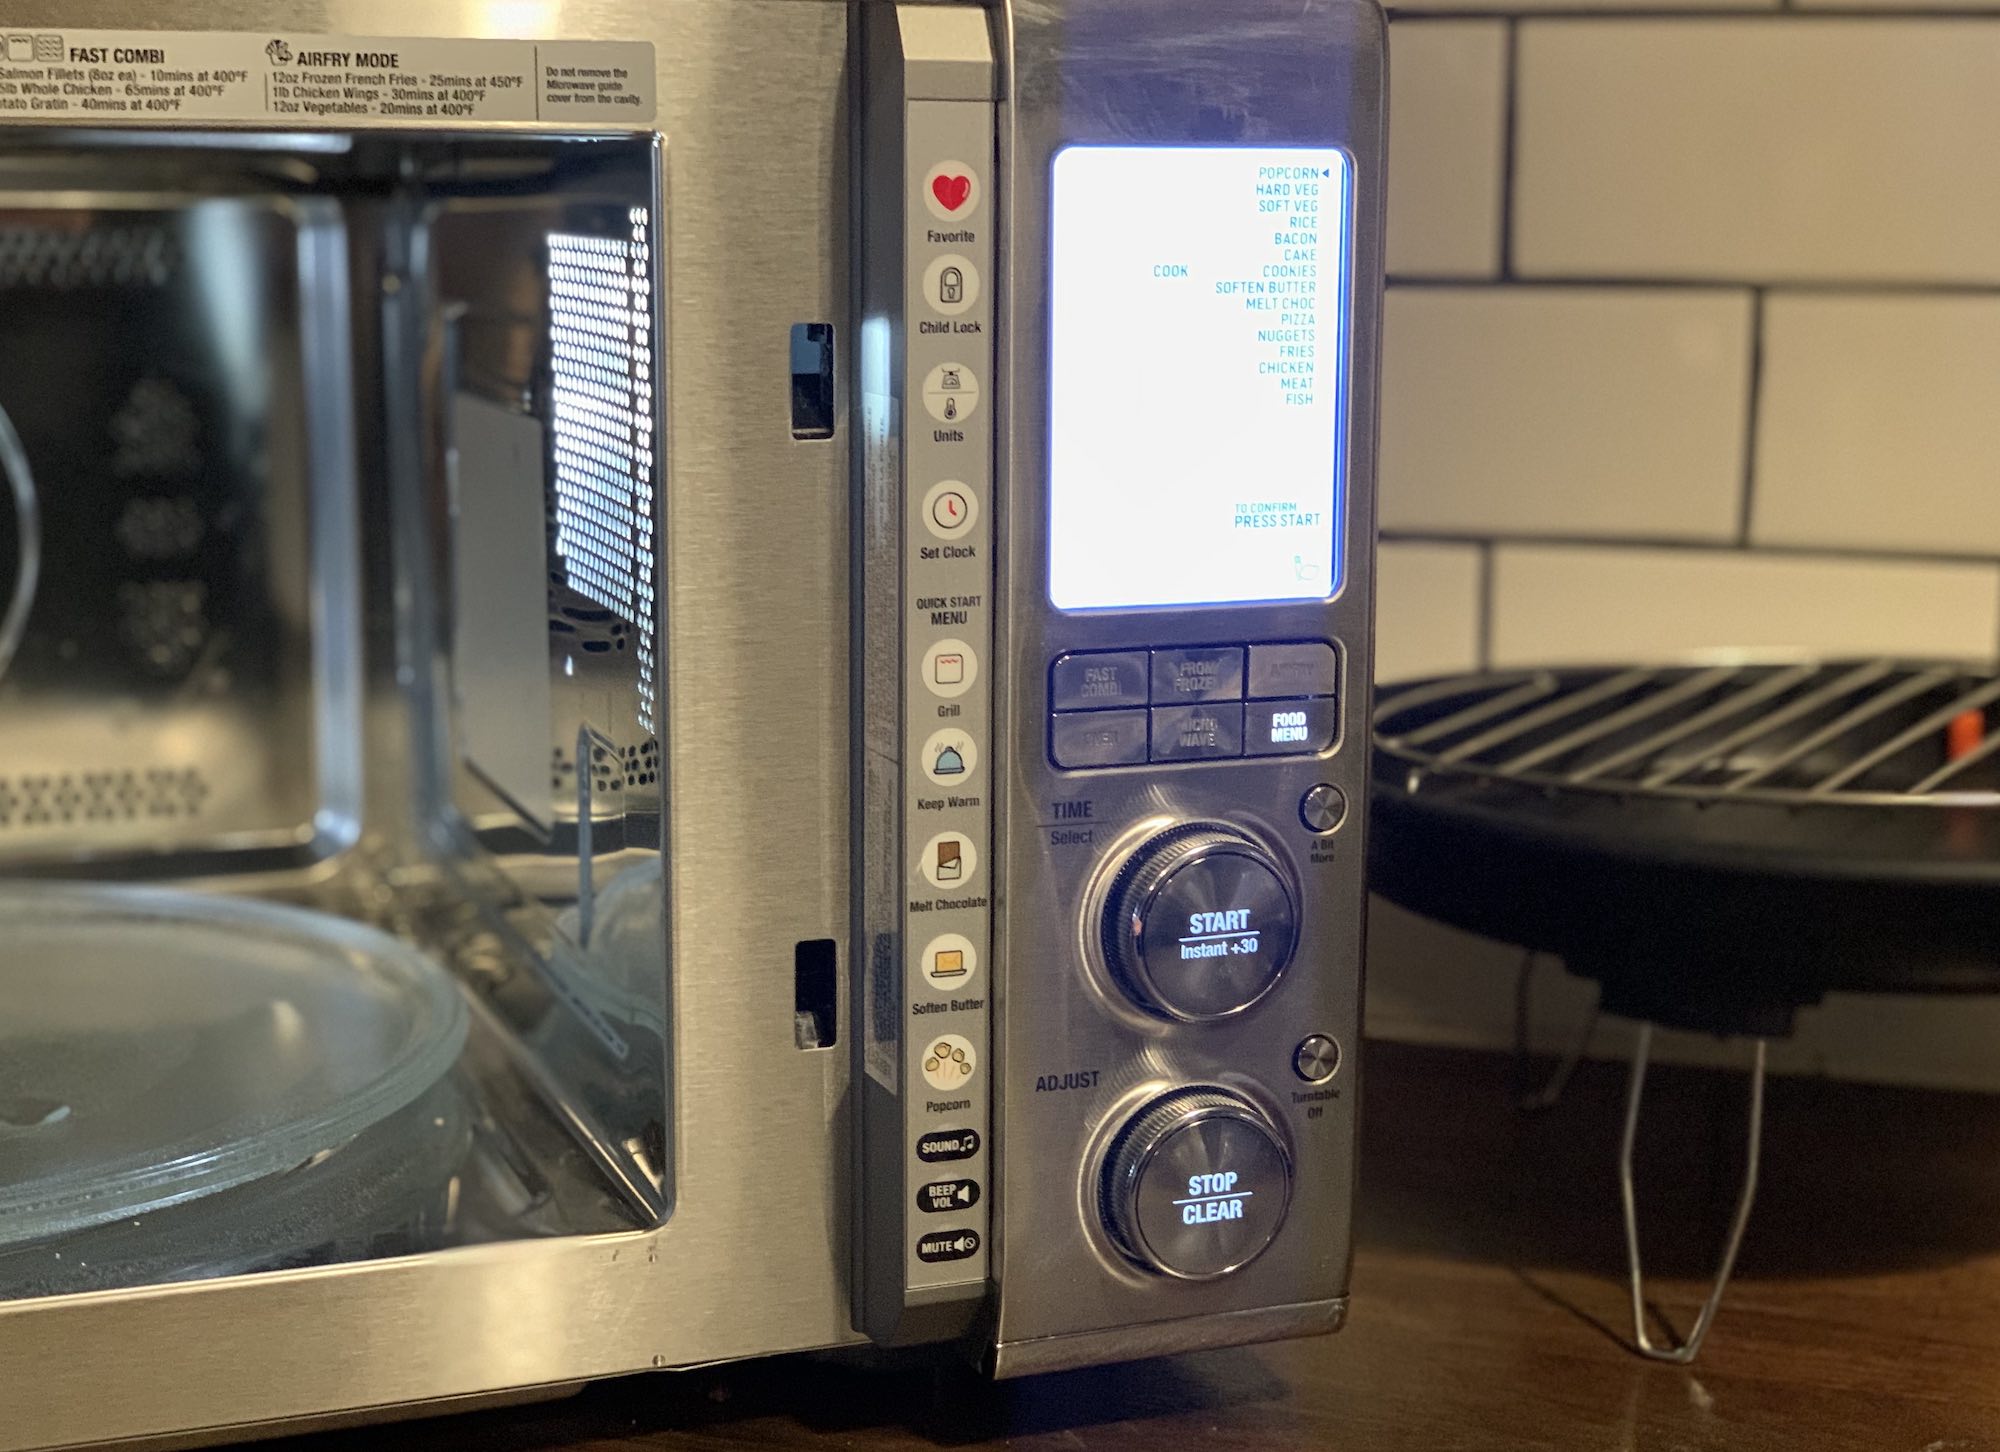 Breville Countertop Convection Microwave Review